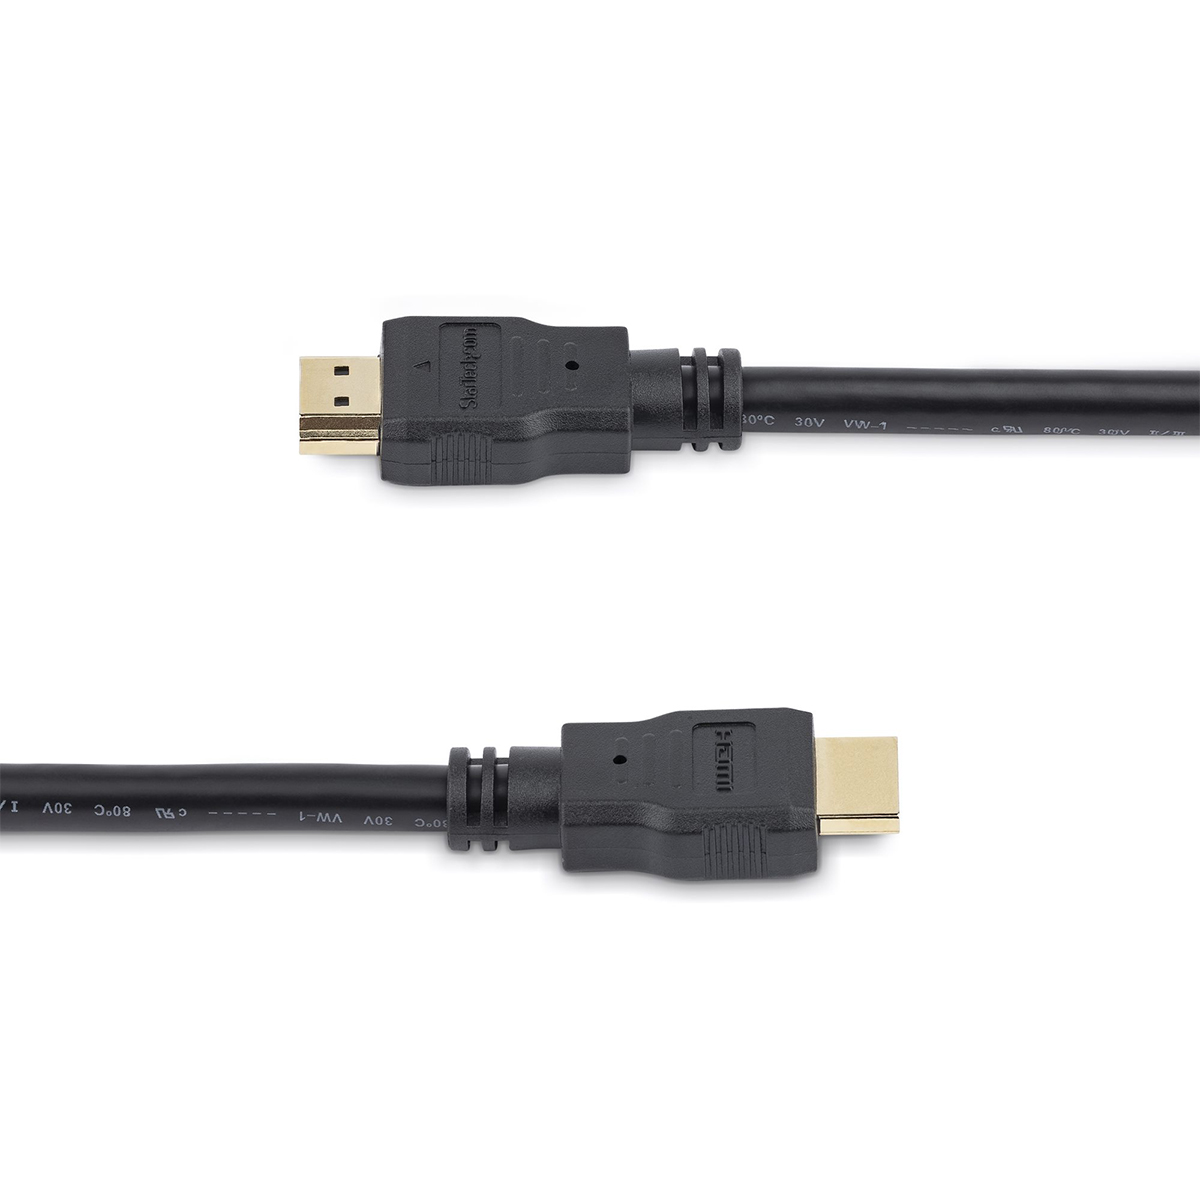 Cable Hdmi 15 Metros Fullhd 1080p Ps3 Xbox 360 Laptop Ps4